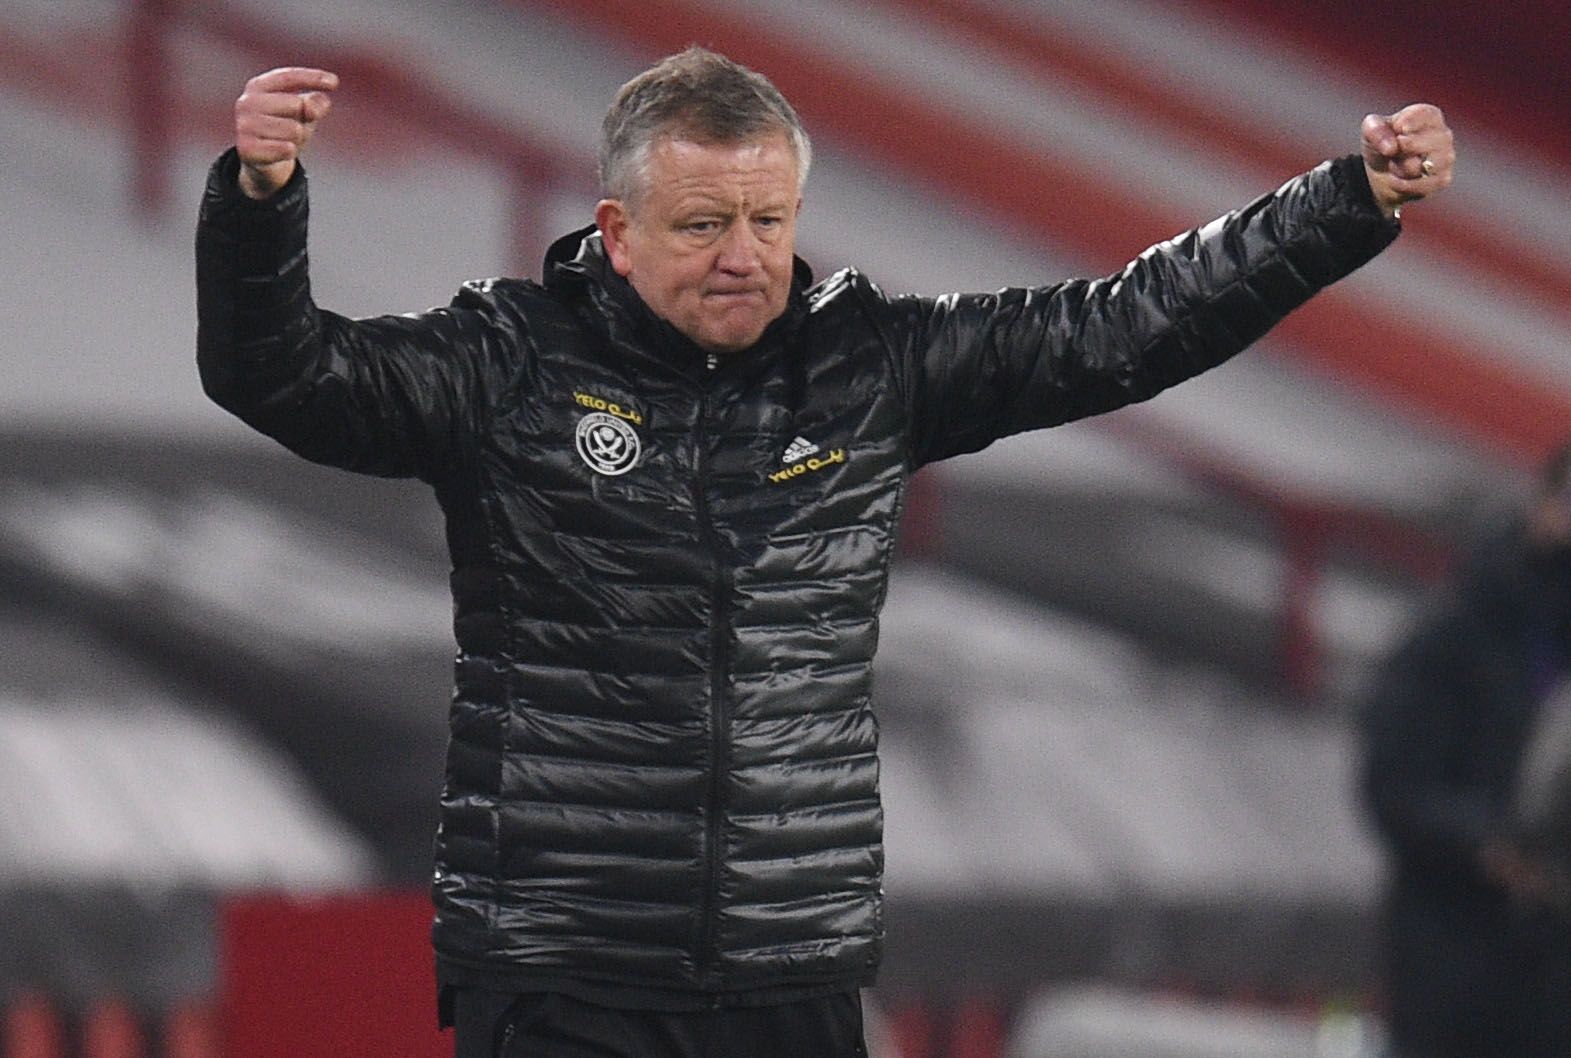 Soccer Football - Premier League - Sheffield United v Liverpool - Bramall Lane, Sheffield, Britain - February 28, 2021 Sheffield United manager Chris Wilder reacts Pool via REUTERS/Oli Scarff EDITORIAL USE ONLY. No use with unauthorized audio, video, data, fixture lists, club/league logos or 'live' services. Online in-match use limited to 75 images, no video emulation. No use in betting, games or single club /league/player publications.  Please contact your account representative for further det